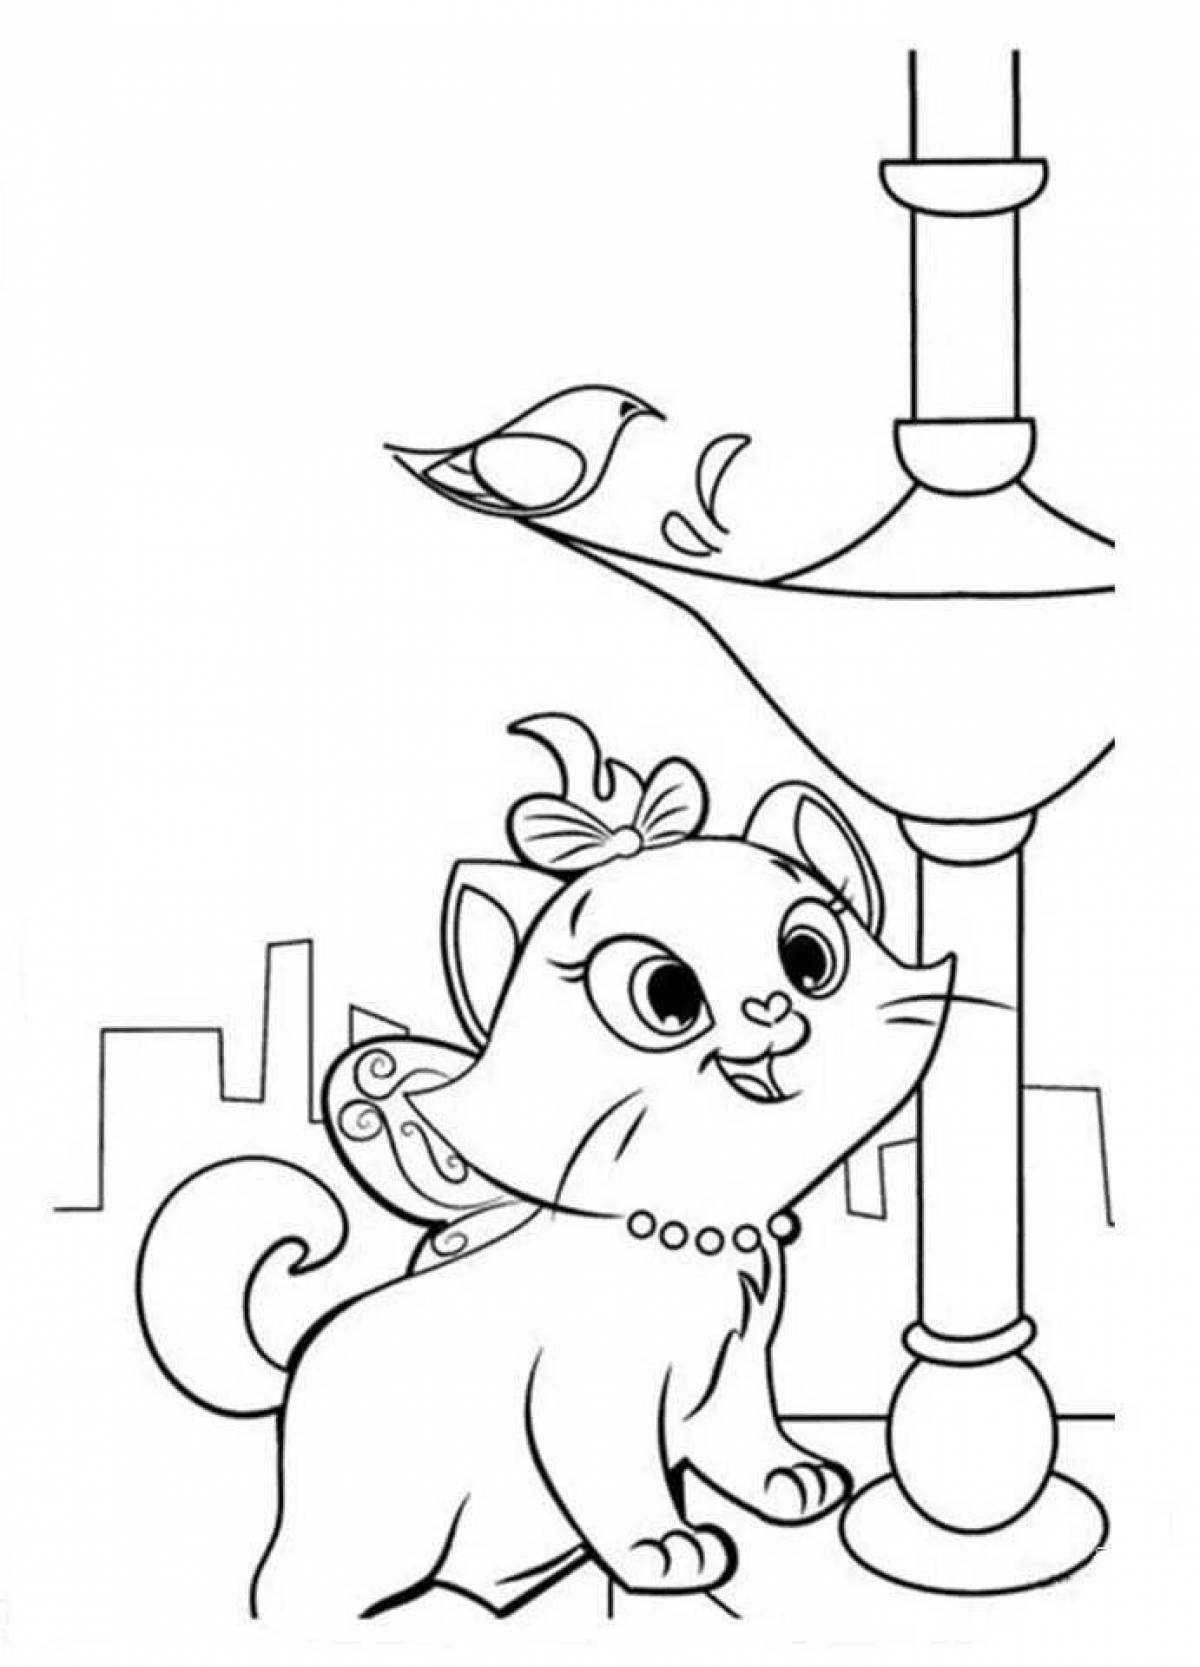 Marie kitty coloring book